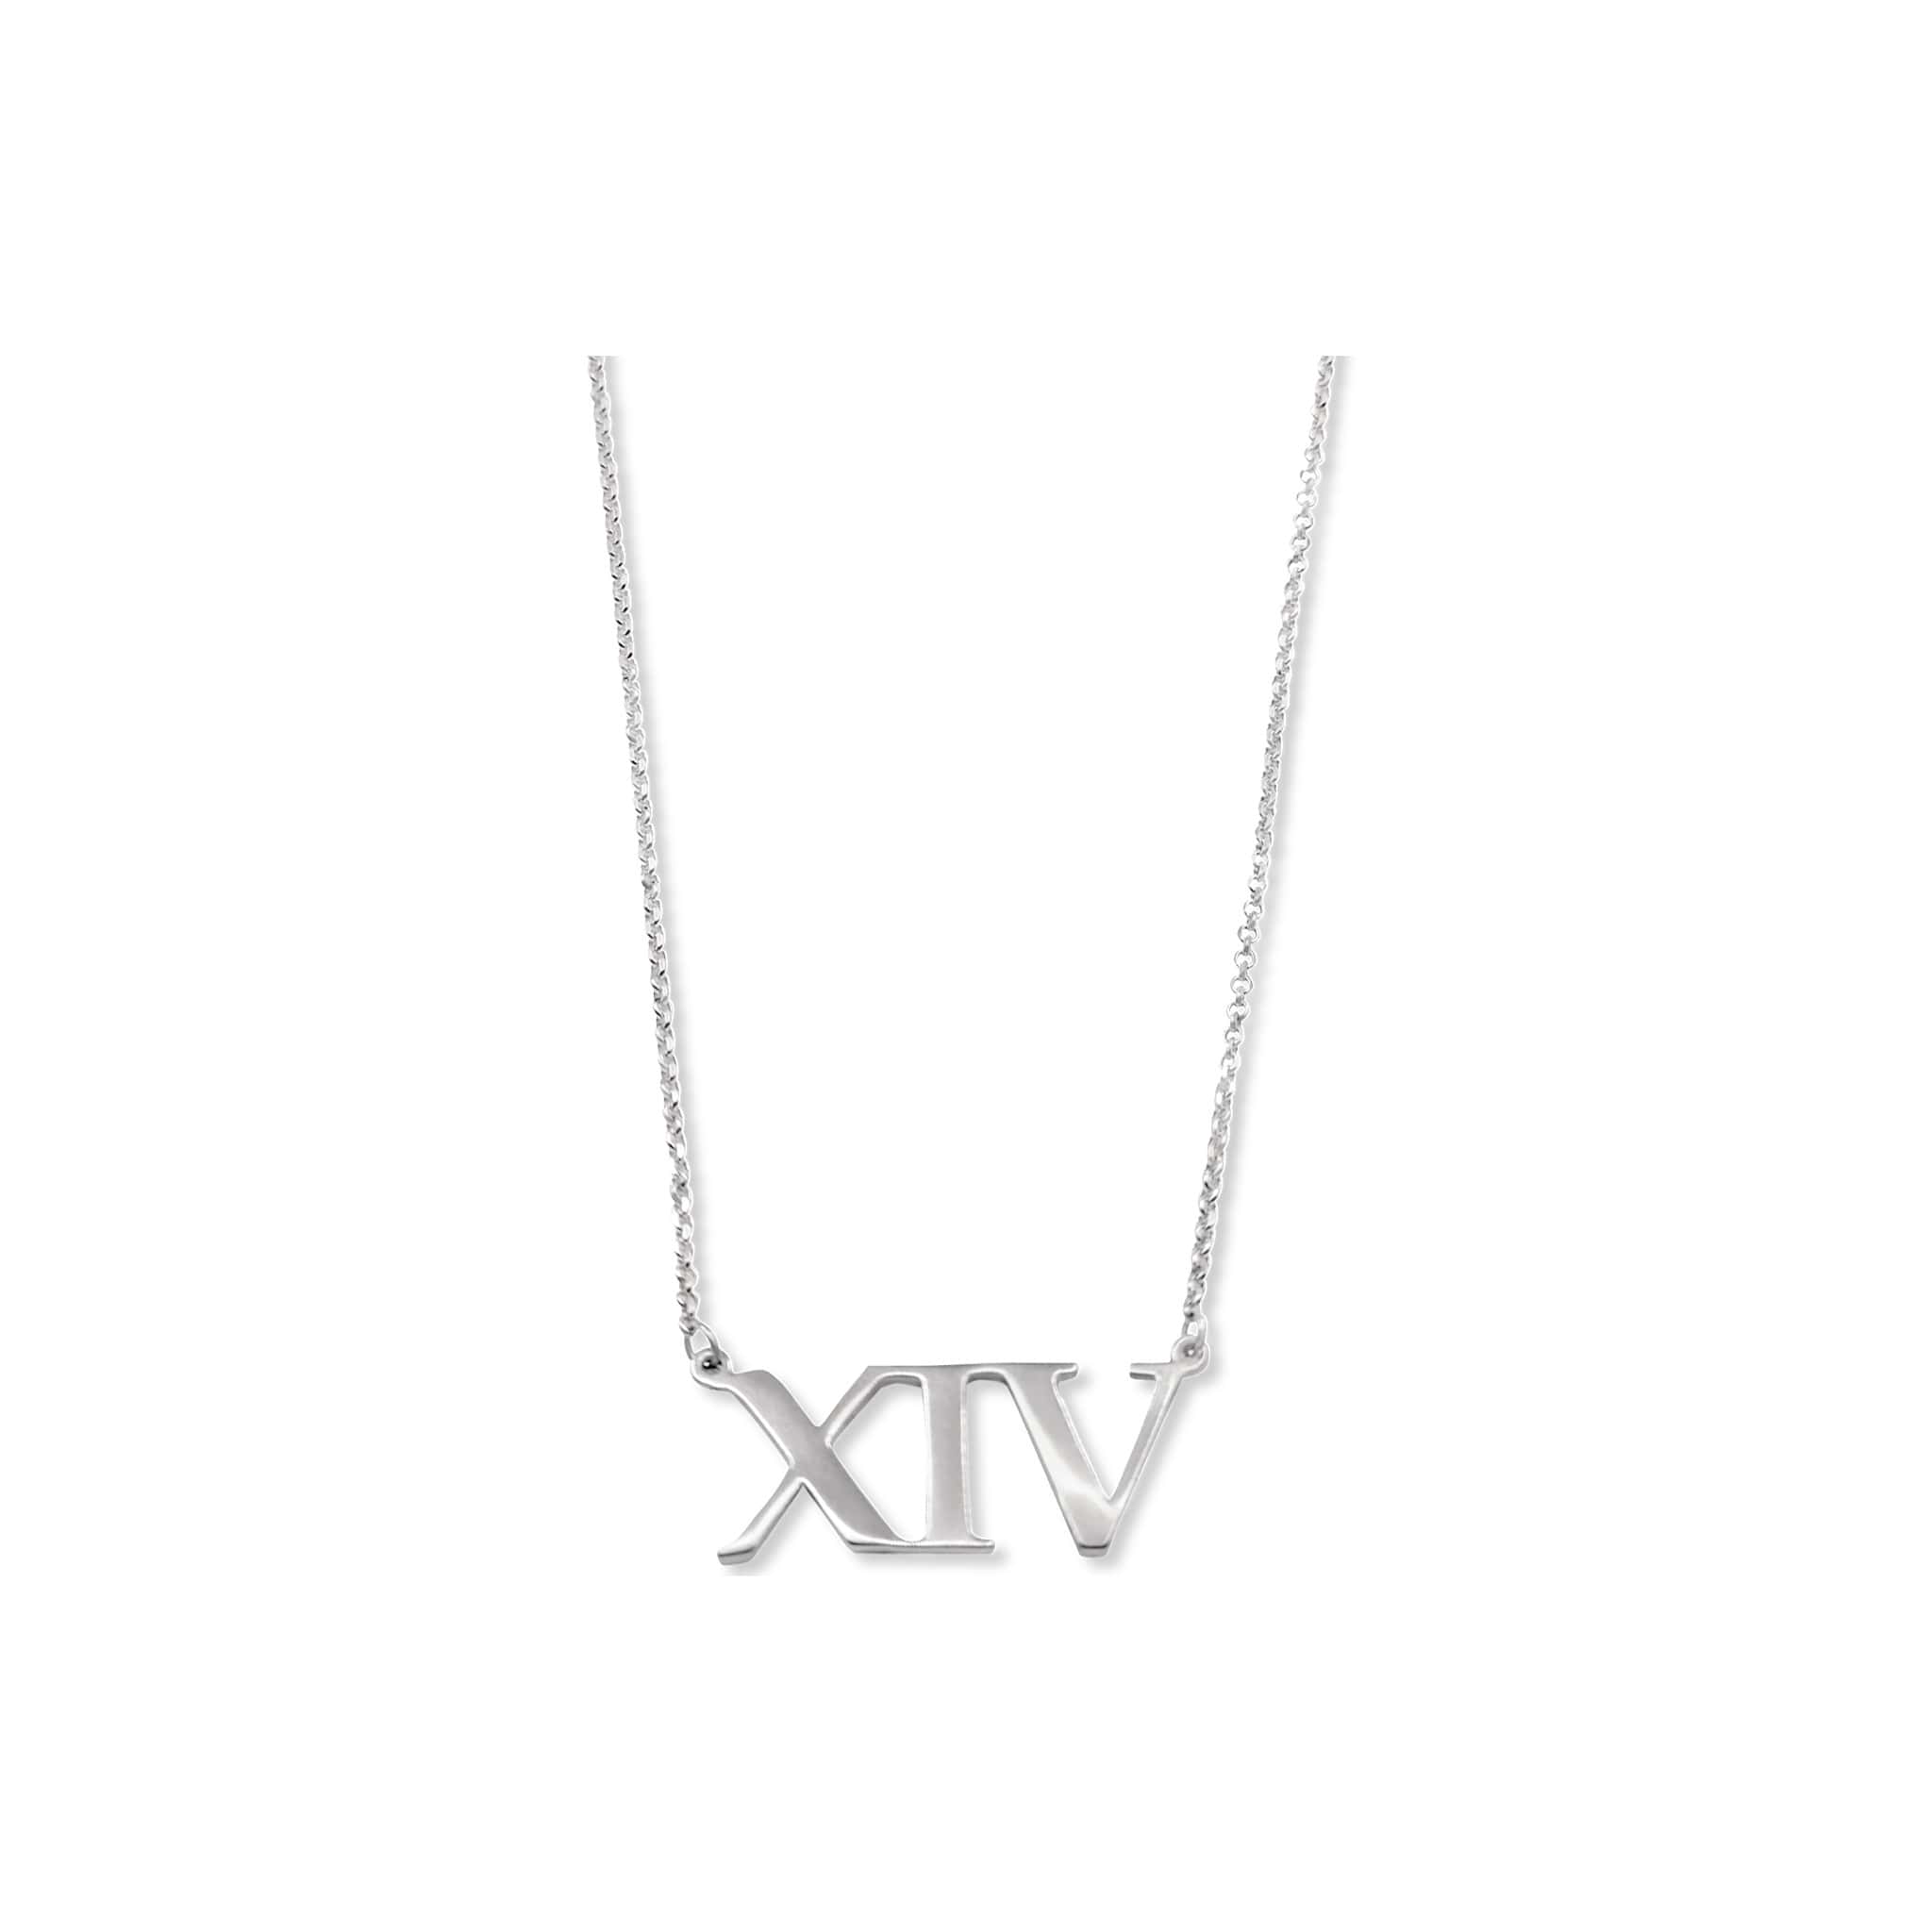 RW XIV Sterling Silver Nameplate Necklace